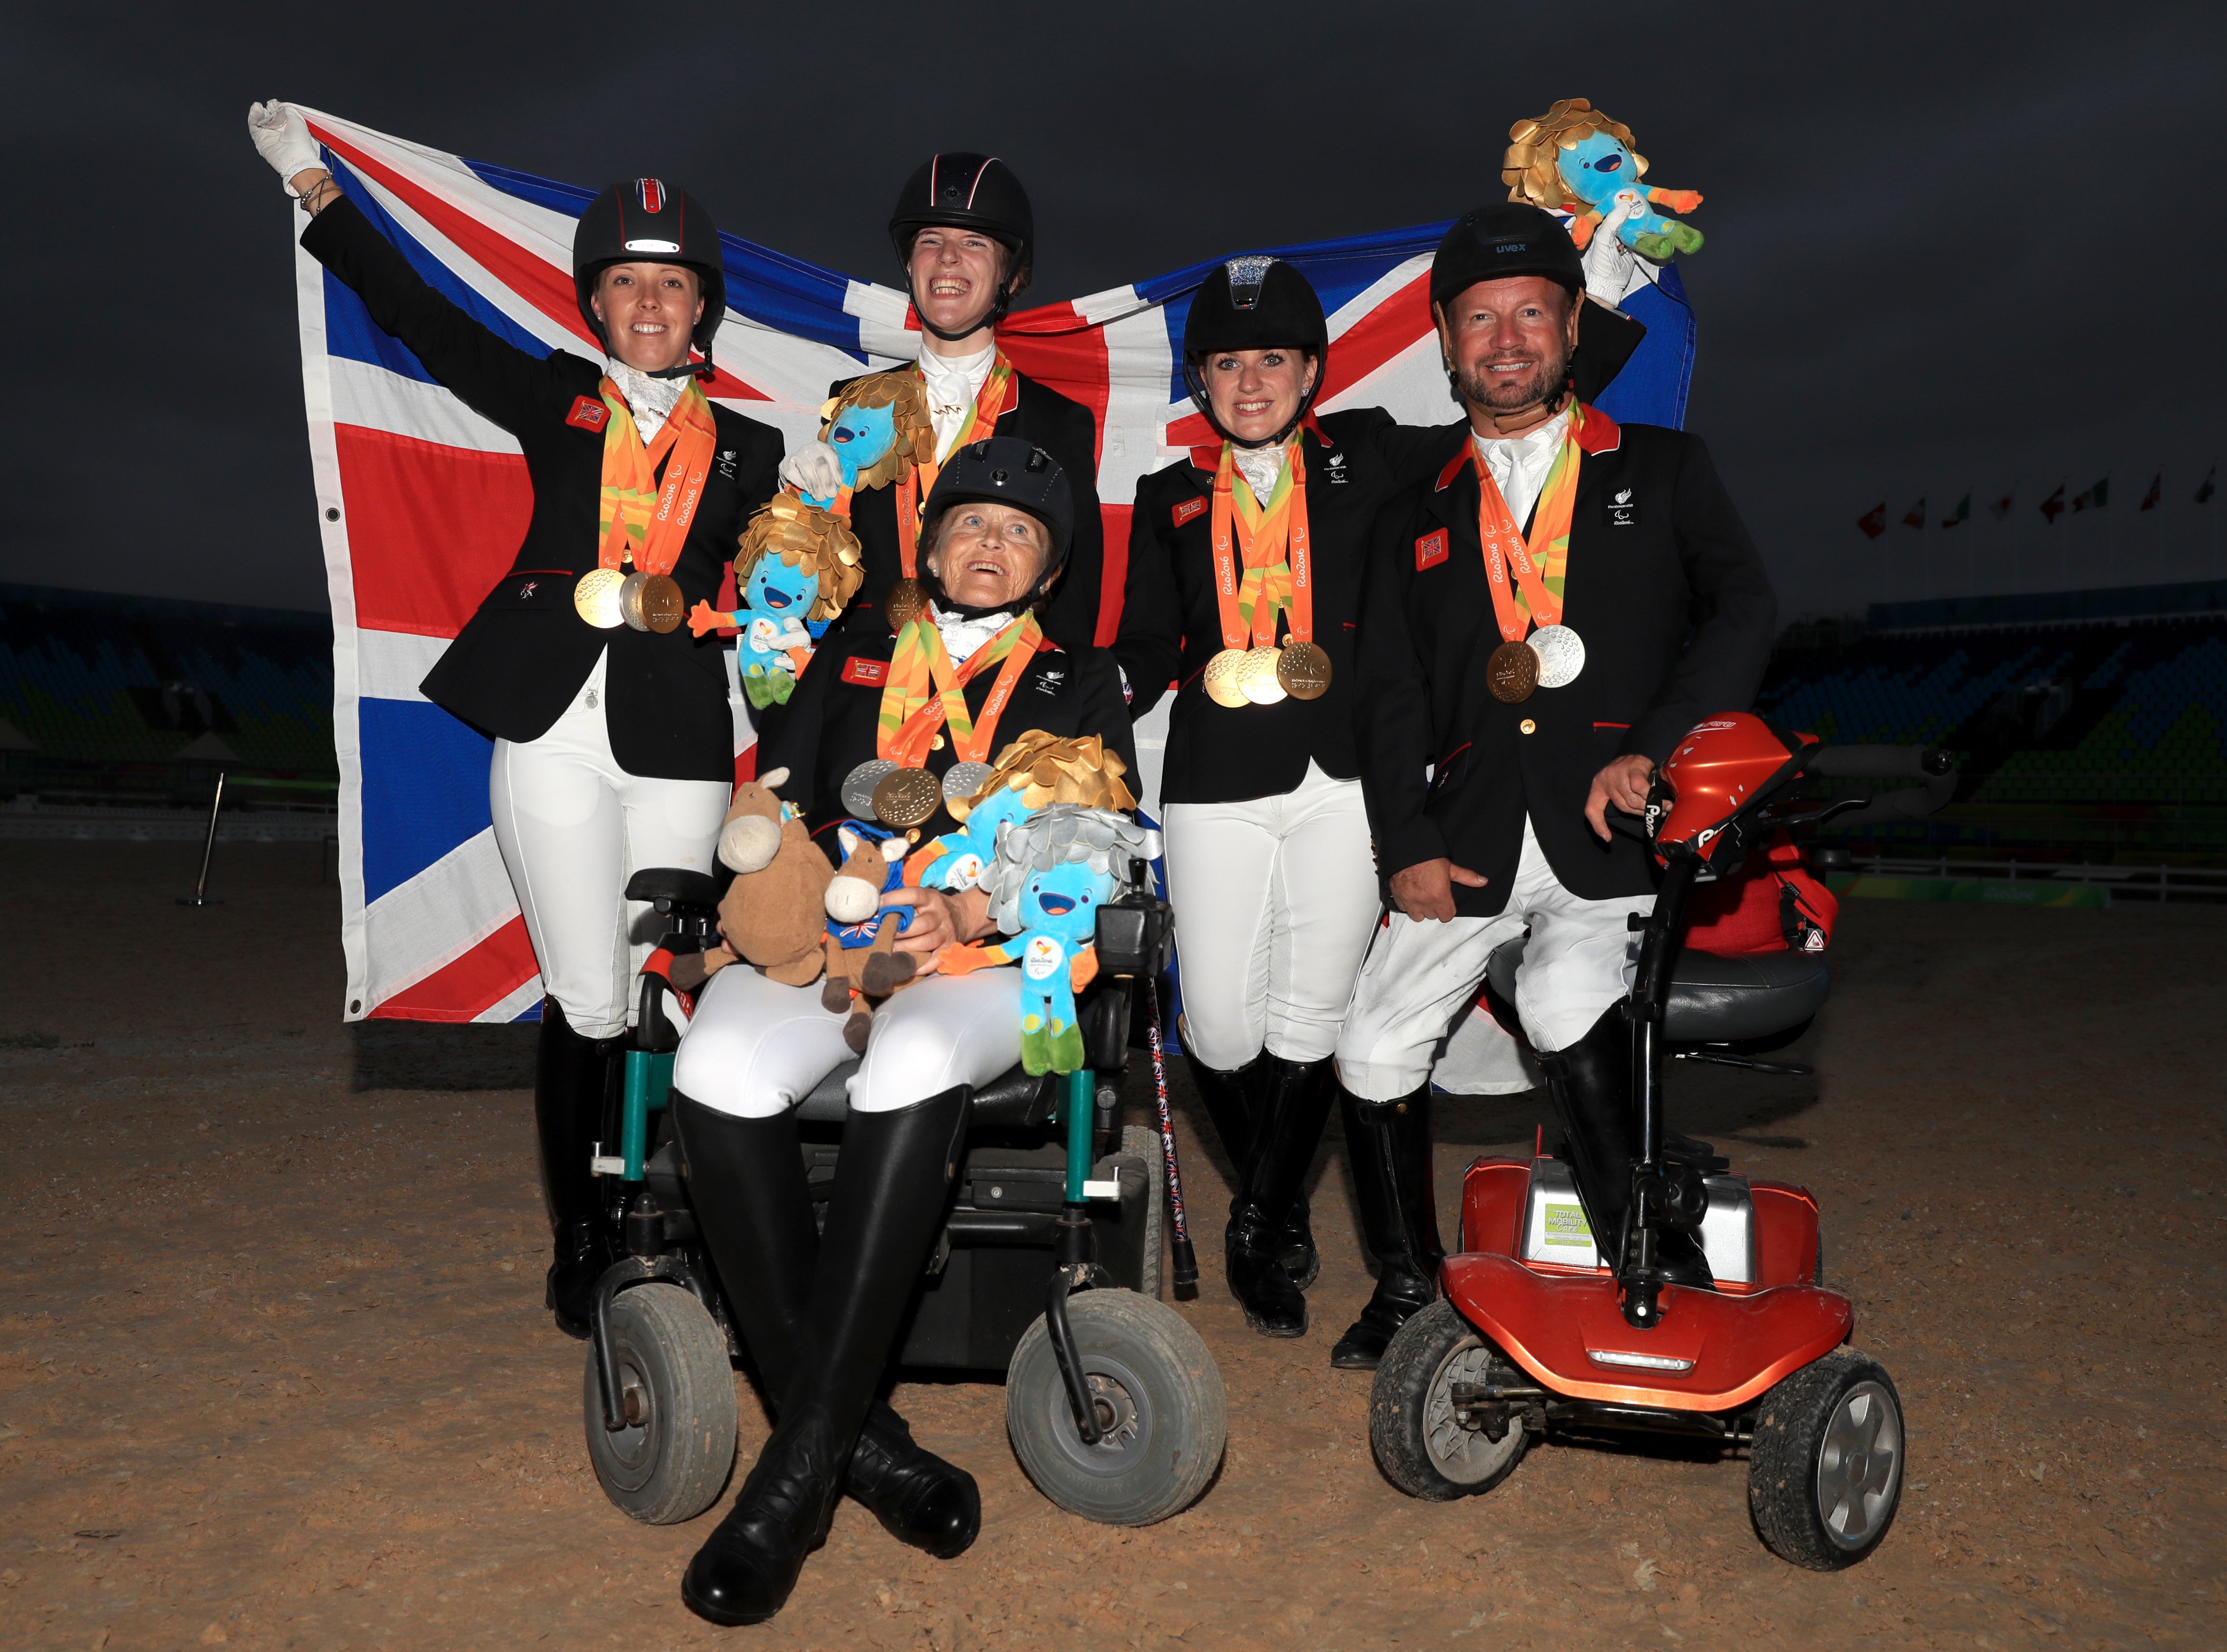 Great Britain's equestrian team topped the medal table at Rio 2016